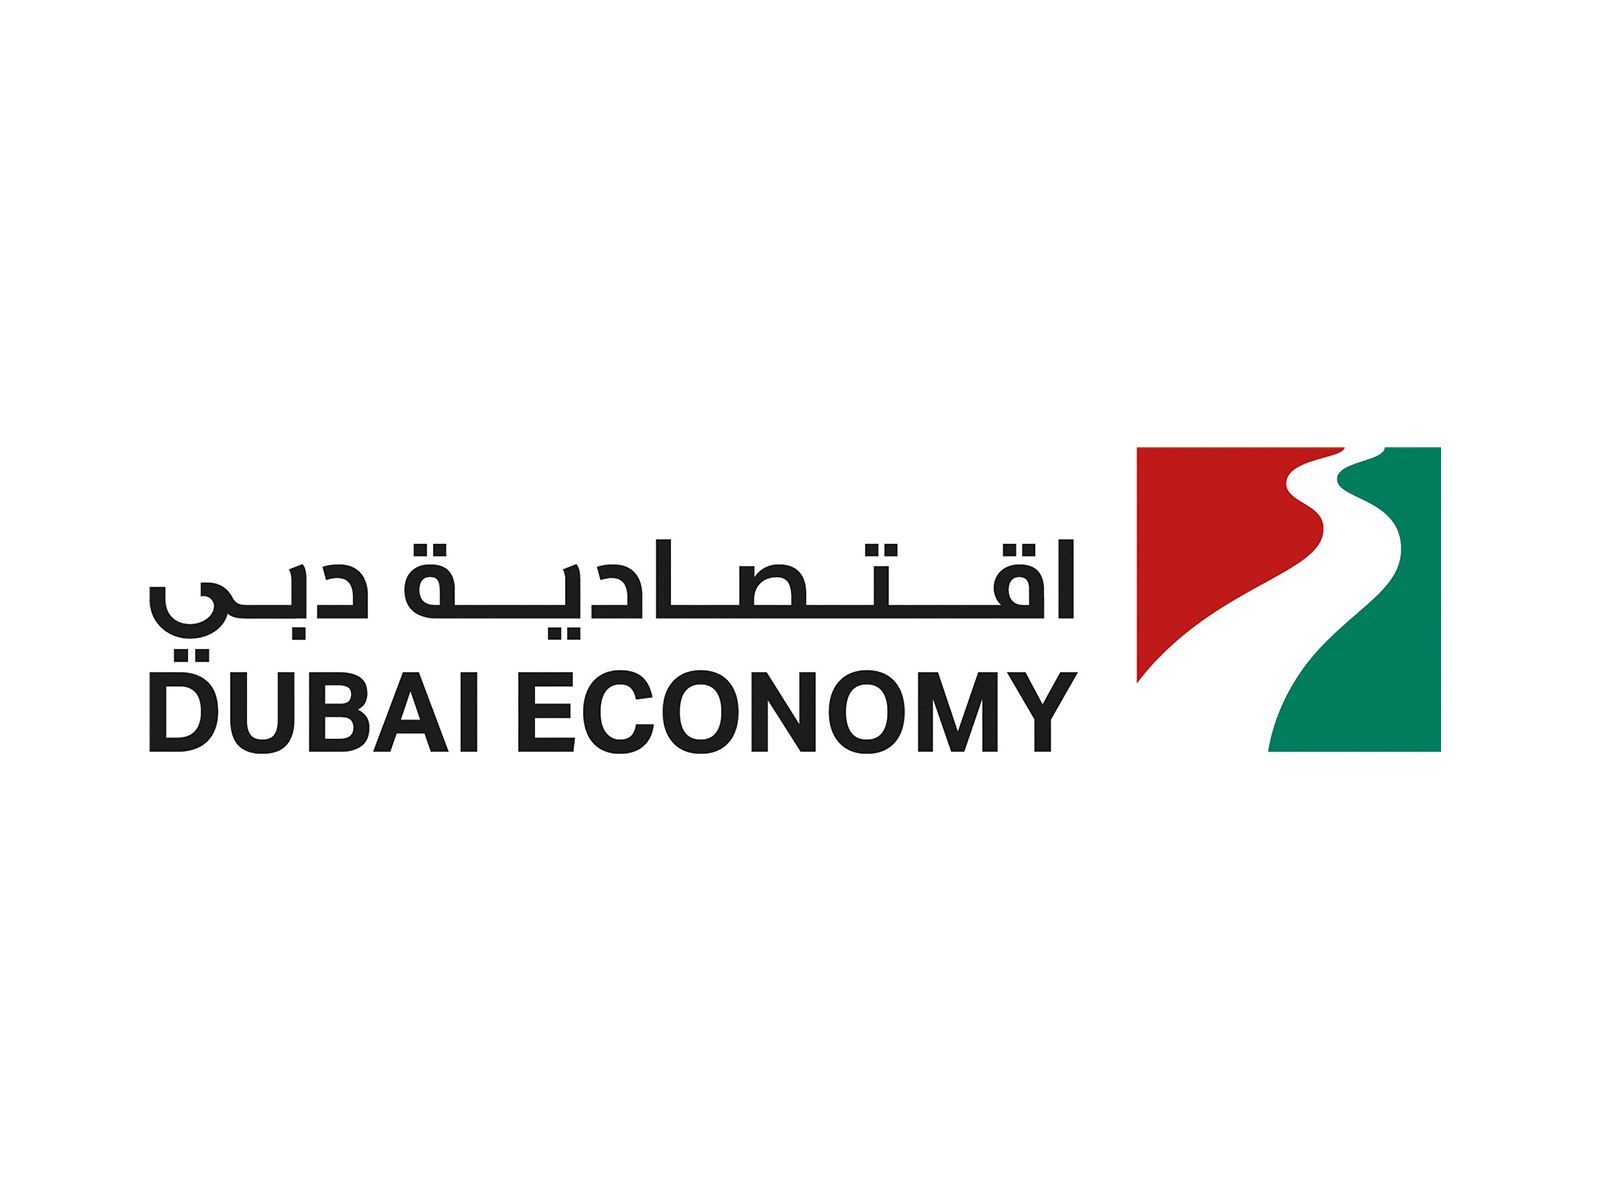 setting up a business in dubai